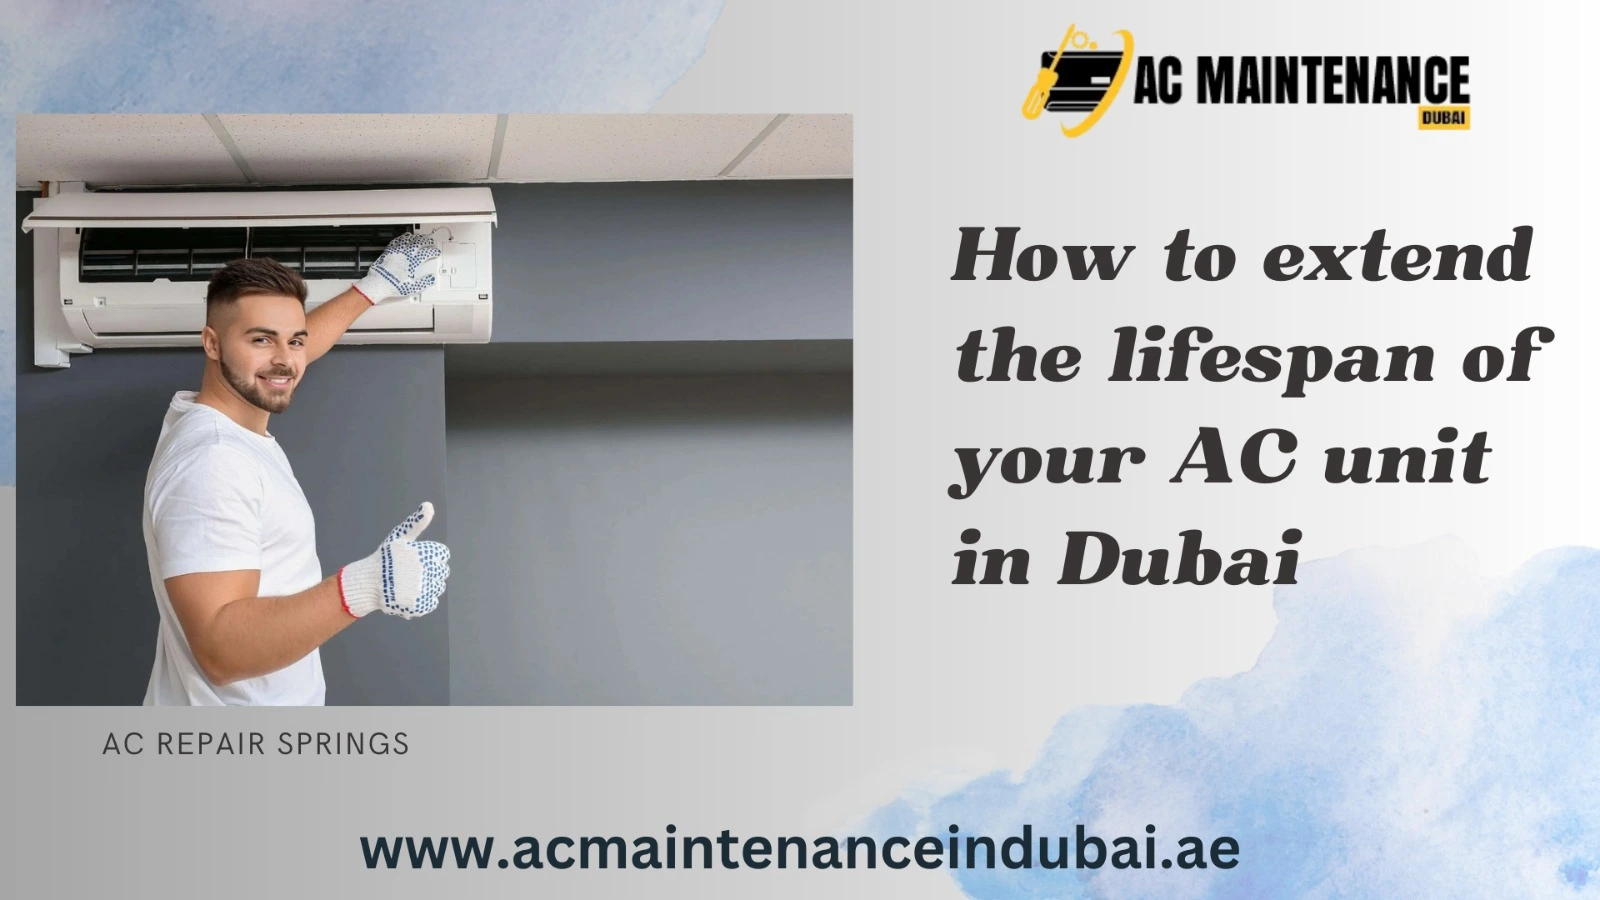 How to extend the lifespan of your AC unit in Dubai